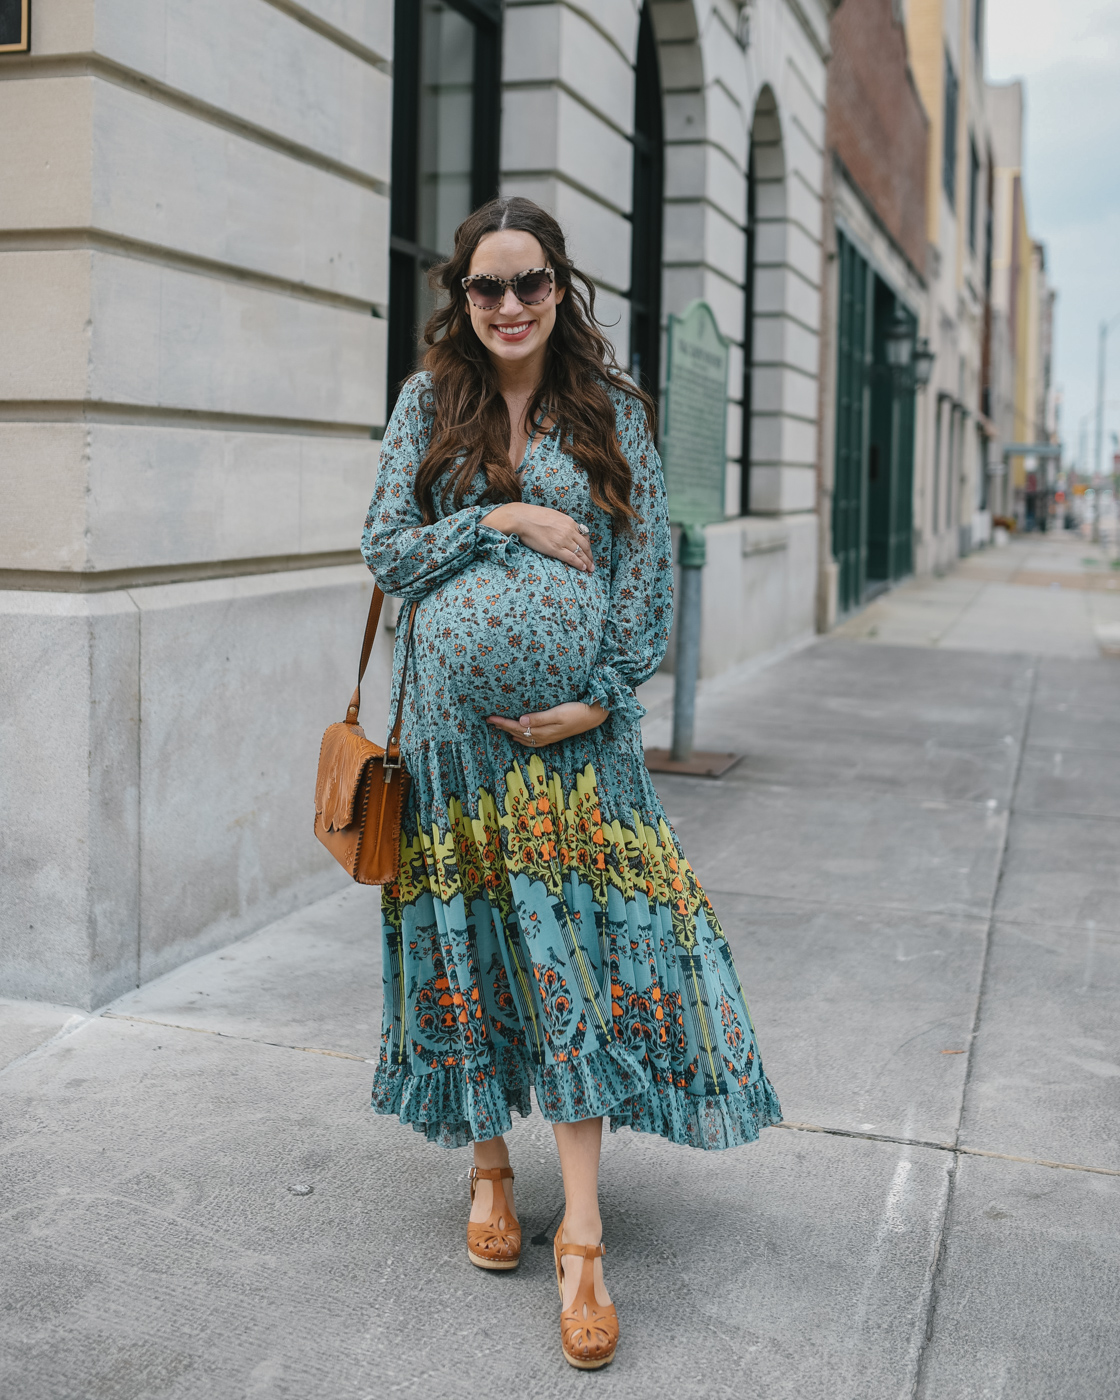 Fall Clothing by popular Memphis fashion blog, Lone Star Looking Glass: image of a woman walking down a city sidewalk and wearing a Free People Free People Feeling Groovy Border Printed Maxi Dress, Swedish clogs, and carrying a Patricia Nash Leather Sarola Crossbody.